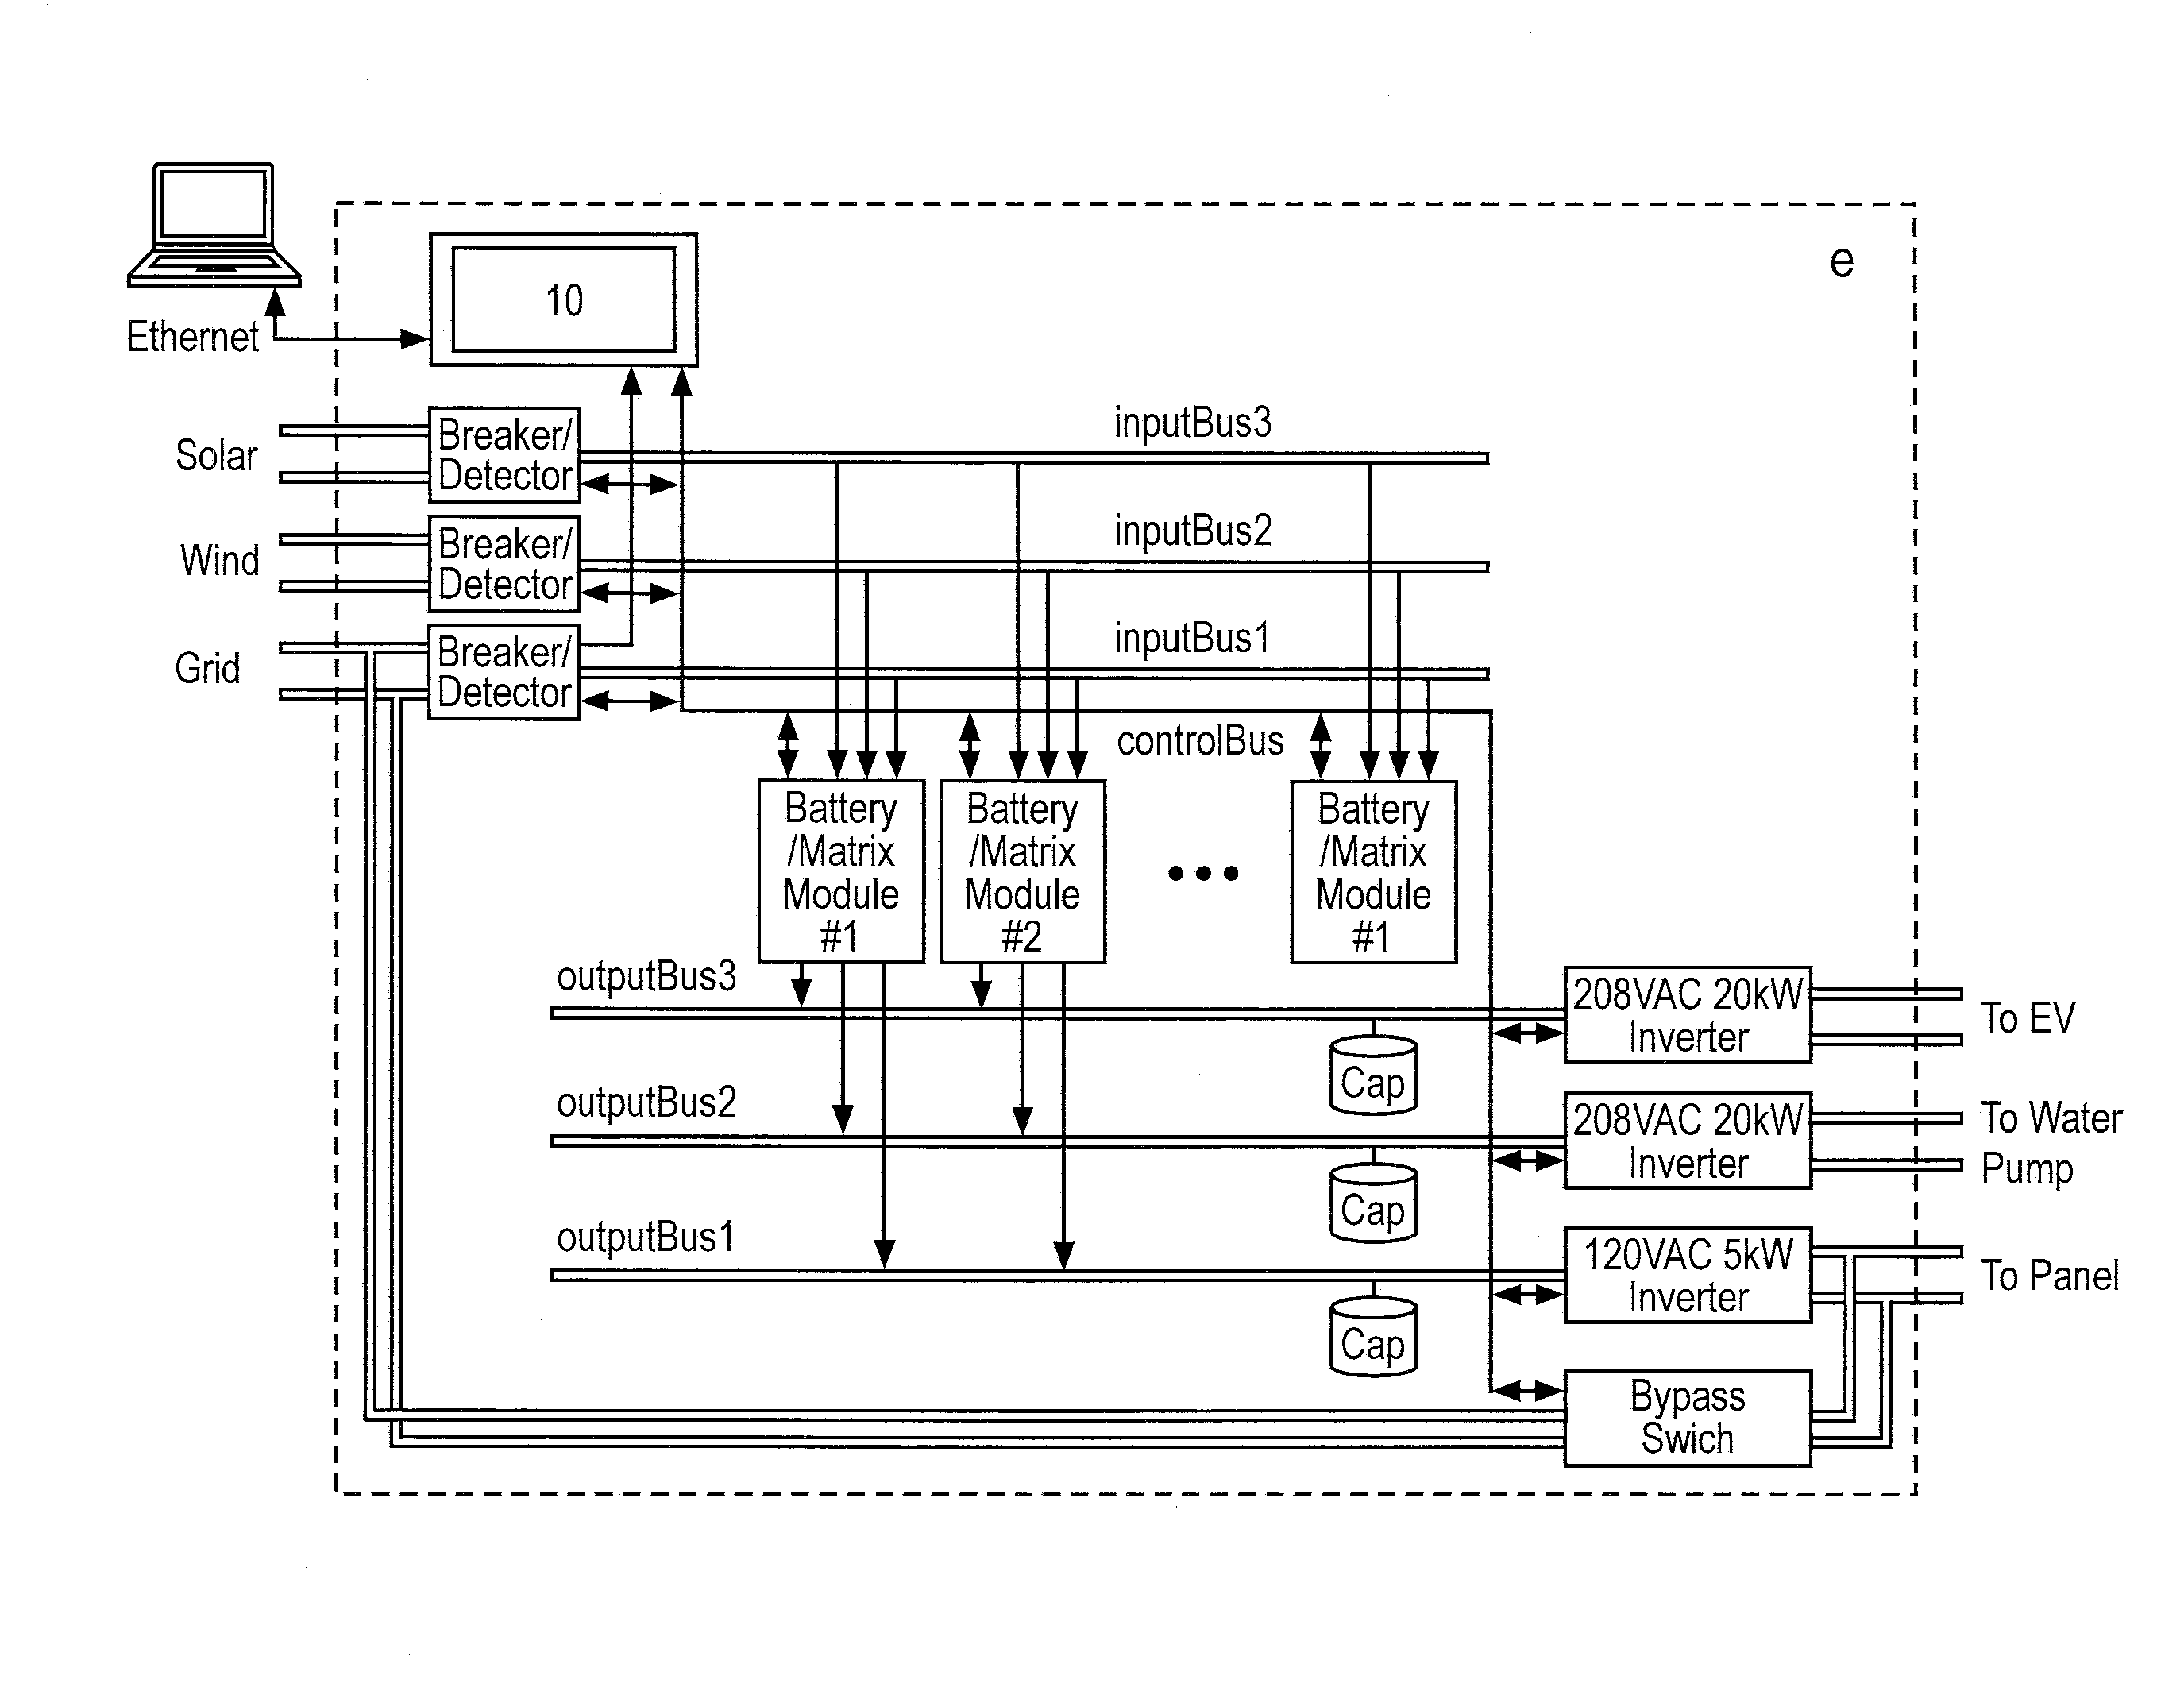 Digital Electrical Routing Control System for Use with Electrical Storage Systems and Conventional and Alternative Energy Sources